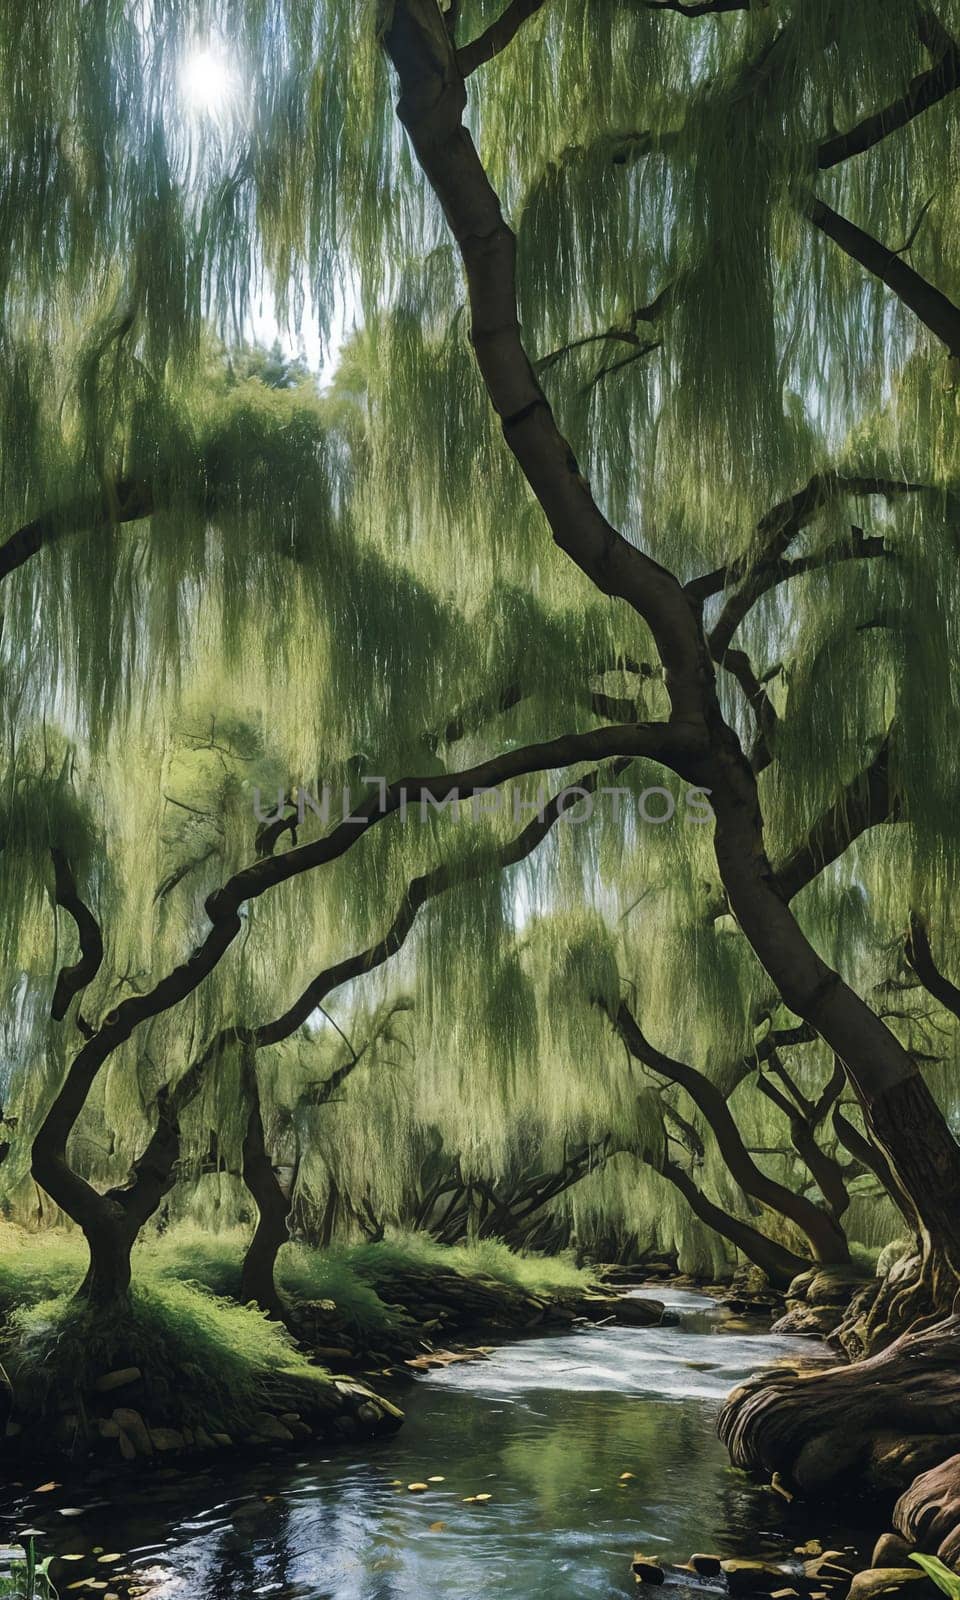 Whispering Willow Grove. Beneath ancient willow trees, their long branches trailing in a silver river, tiny doors appear. Fairies, sprites, and woodland creatures gather here, sharing secrets and laughter.